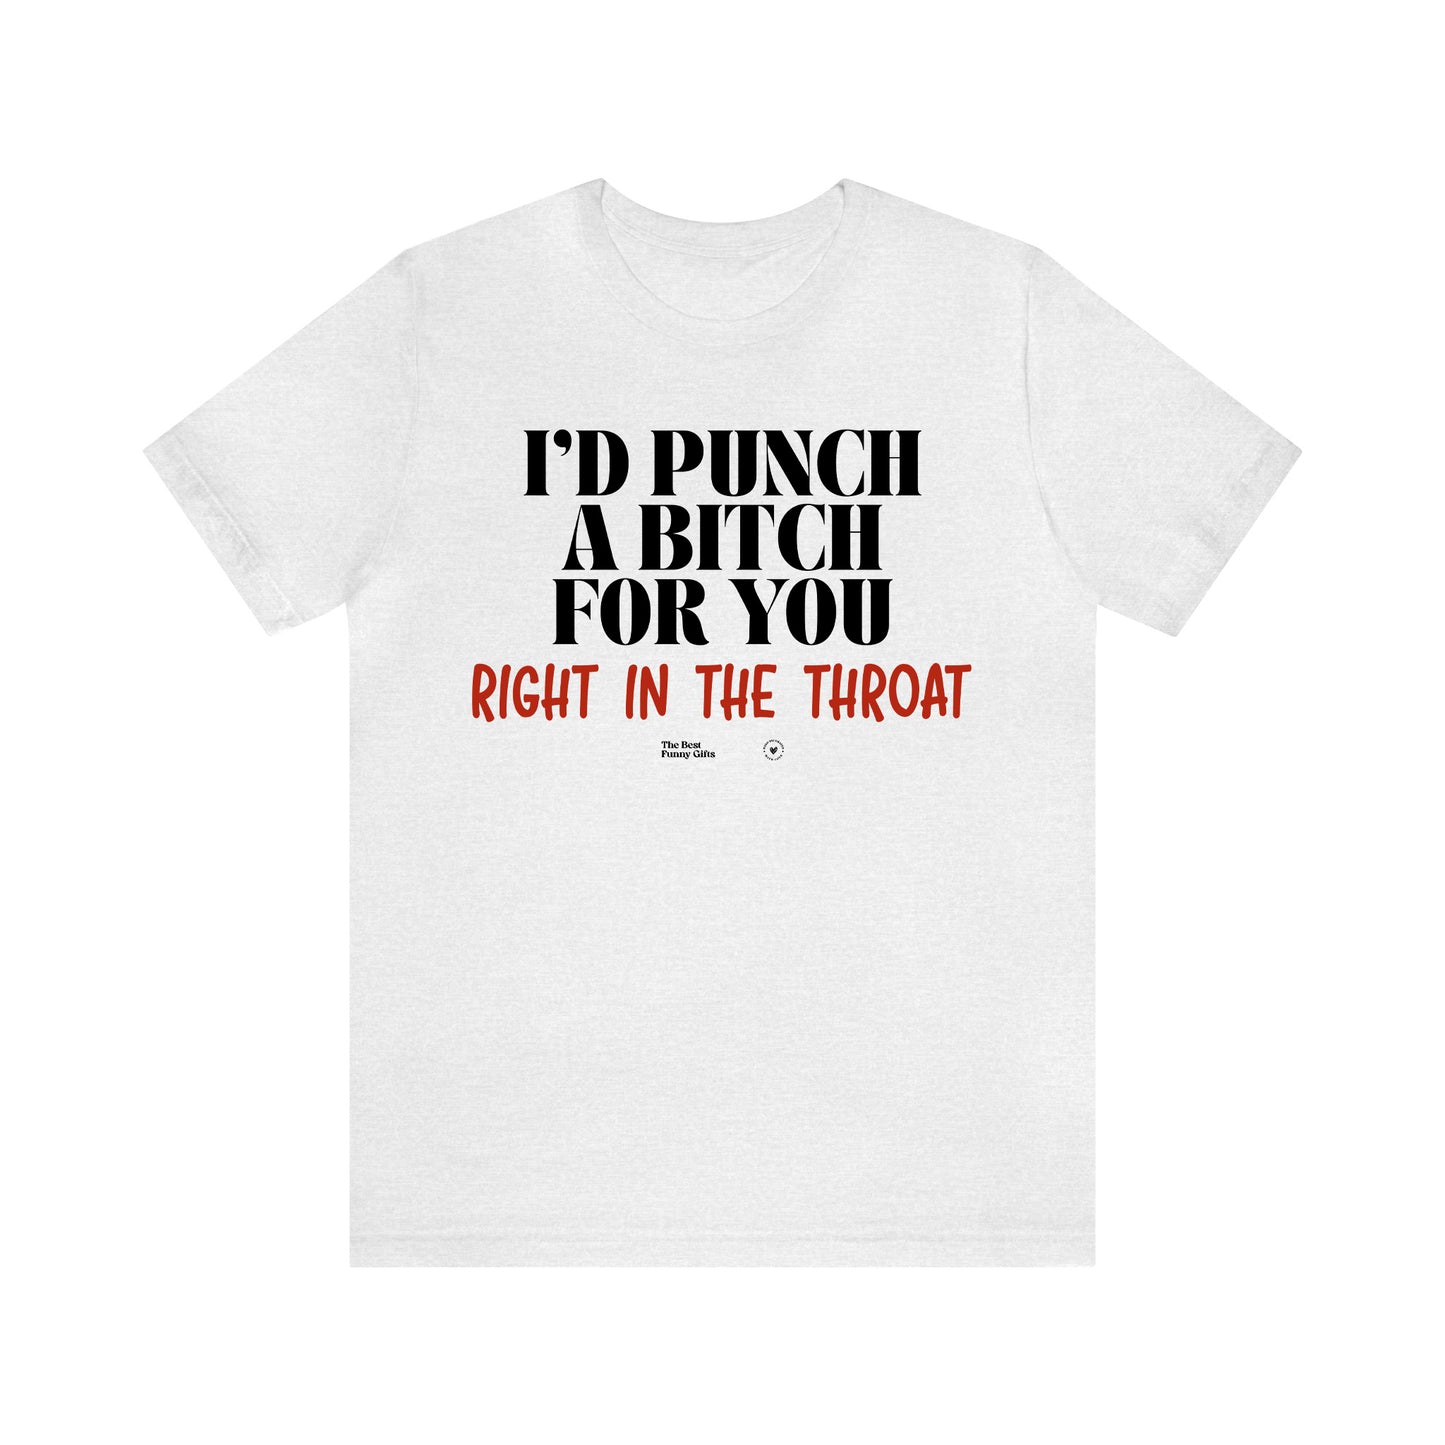 Funny Shirts for Women - I'd Punch a Bitch for You (Right in the Throat) - Women’s T Shirts